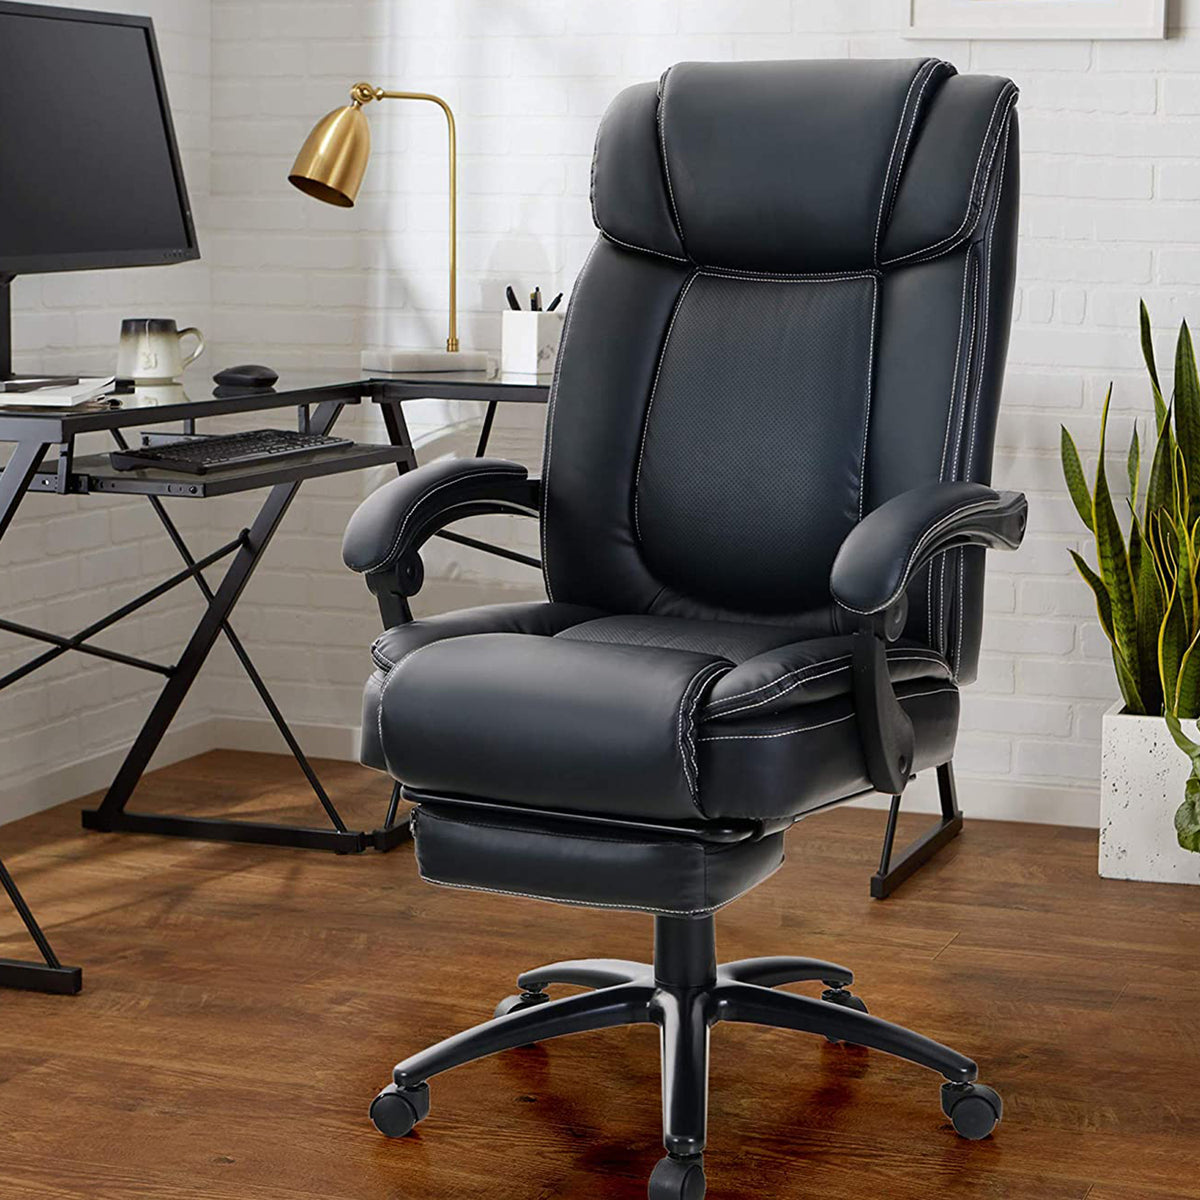 Ergonomic Office Chair High Back PU Leather Computer Chair with